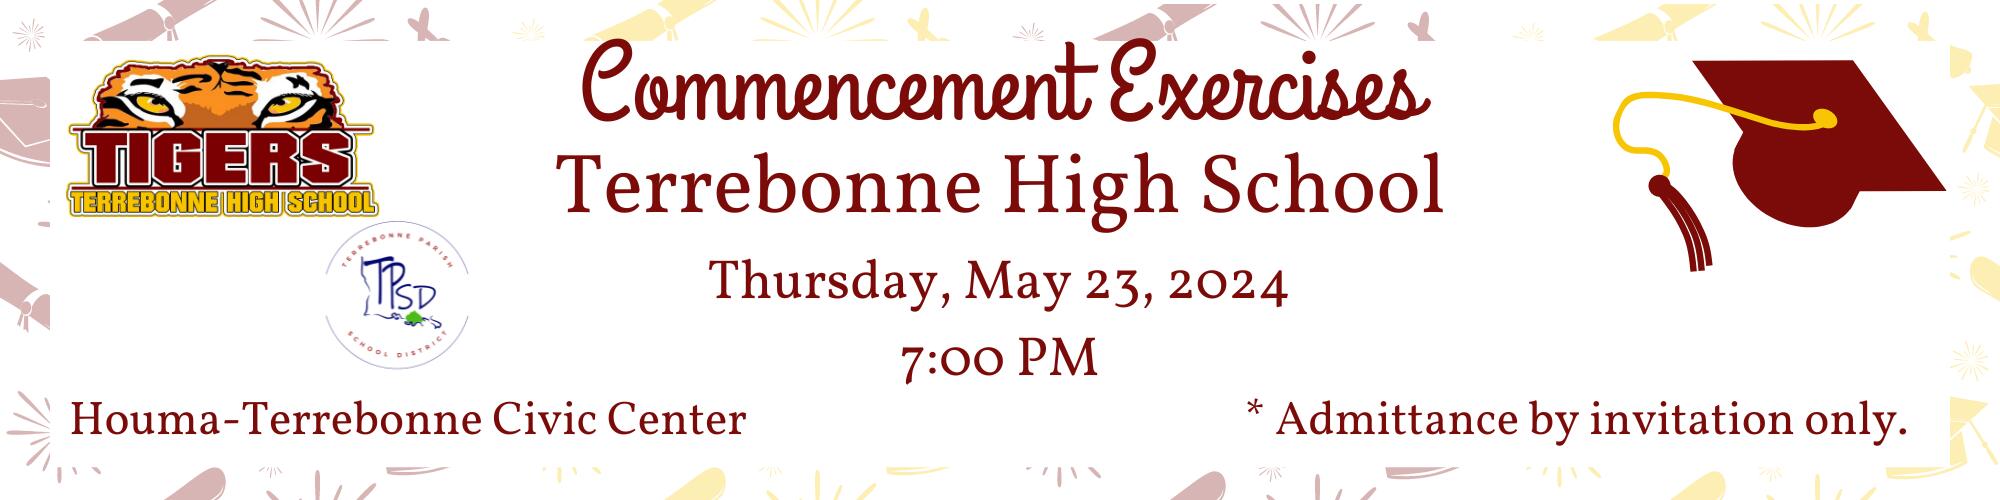 THS Commencement Exercises